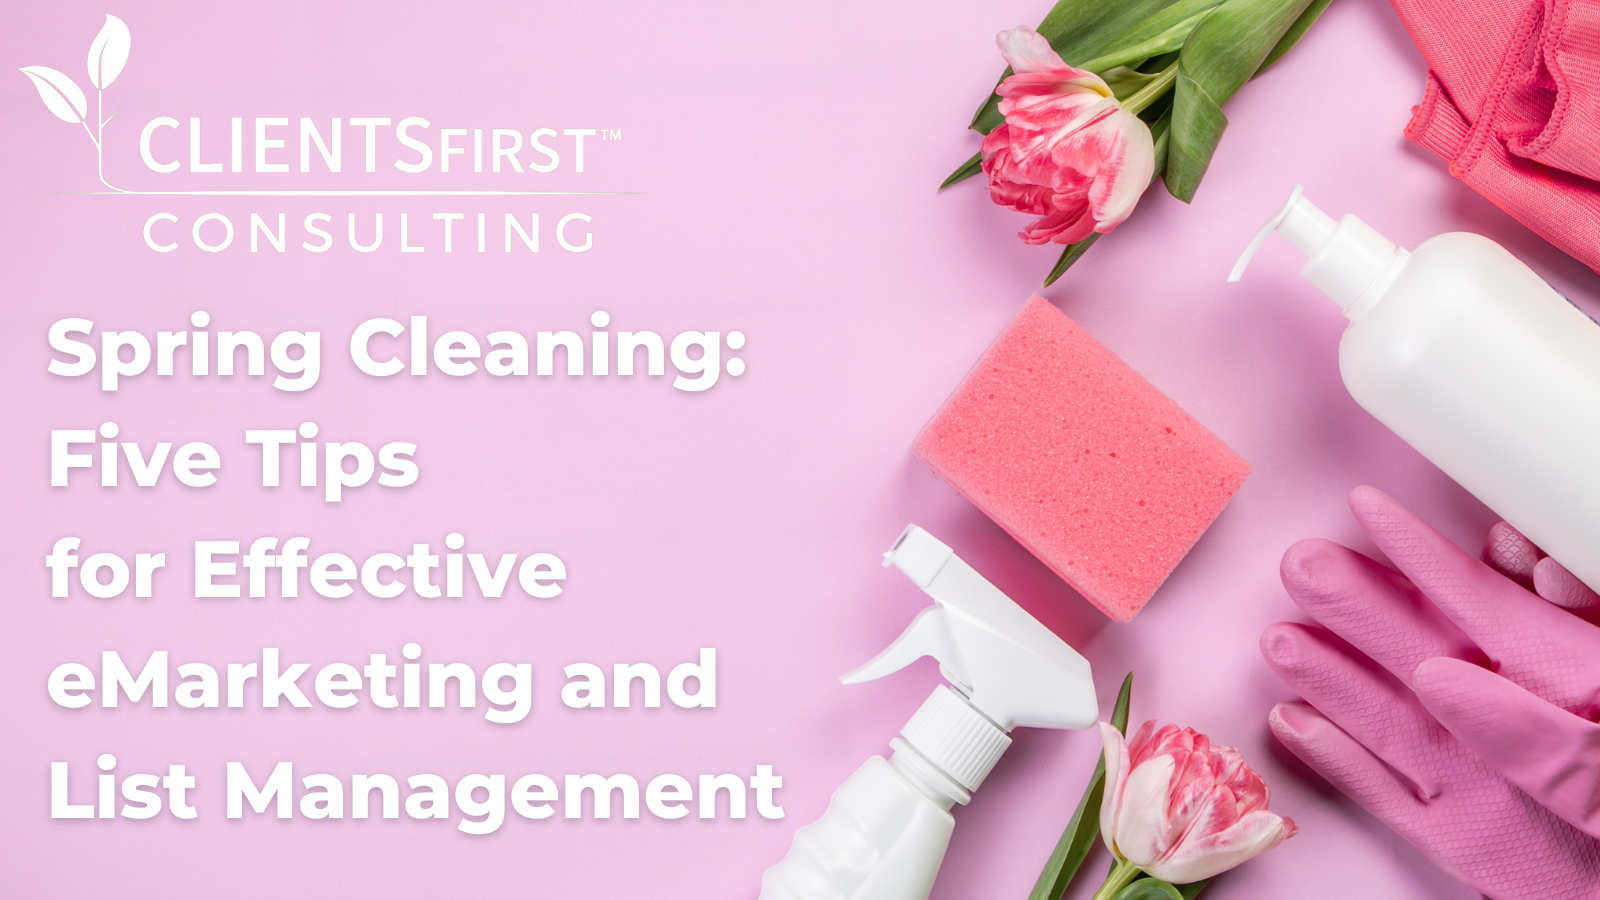 Spring Cleaning: Five Tips For Effective EMarketing & List Management